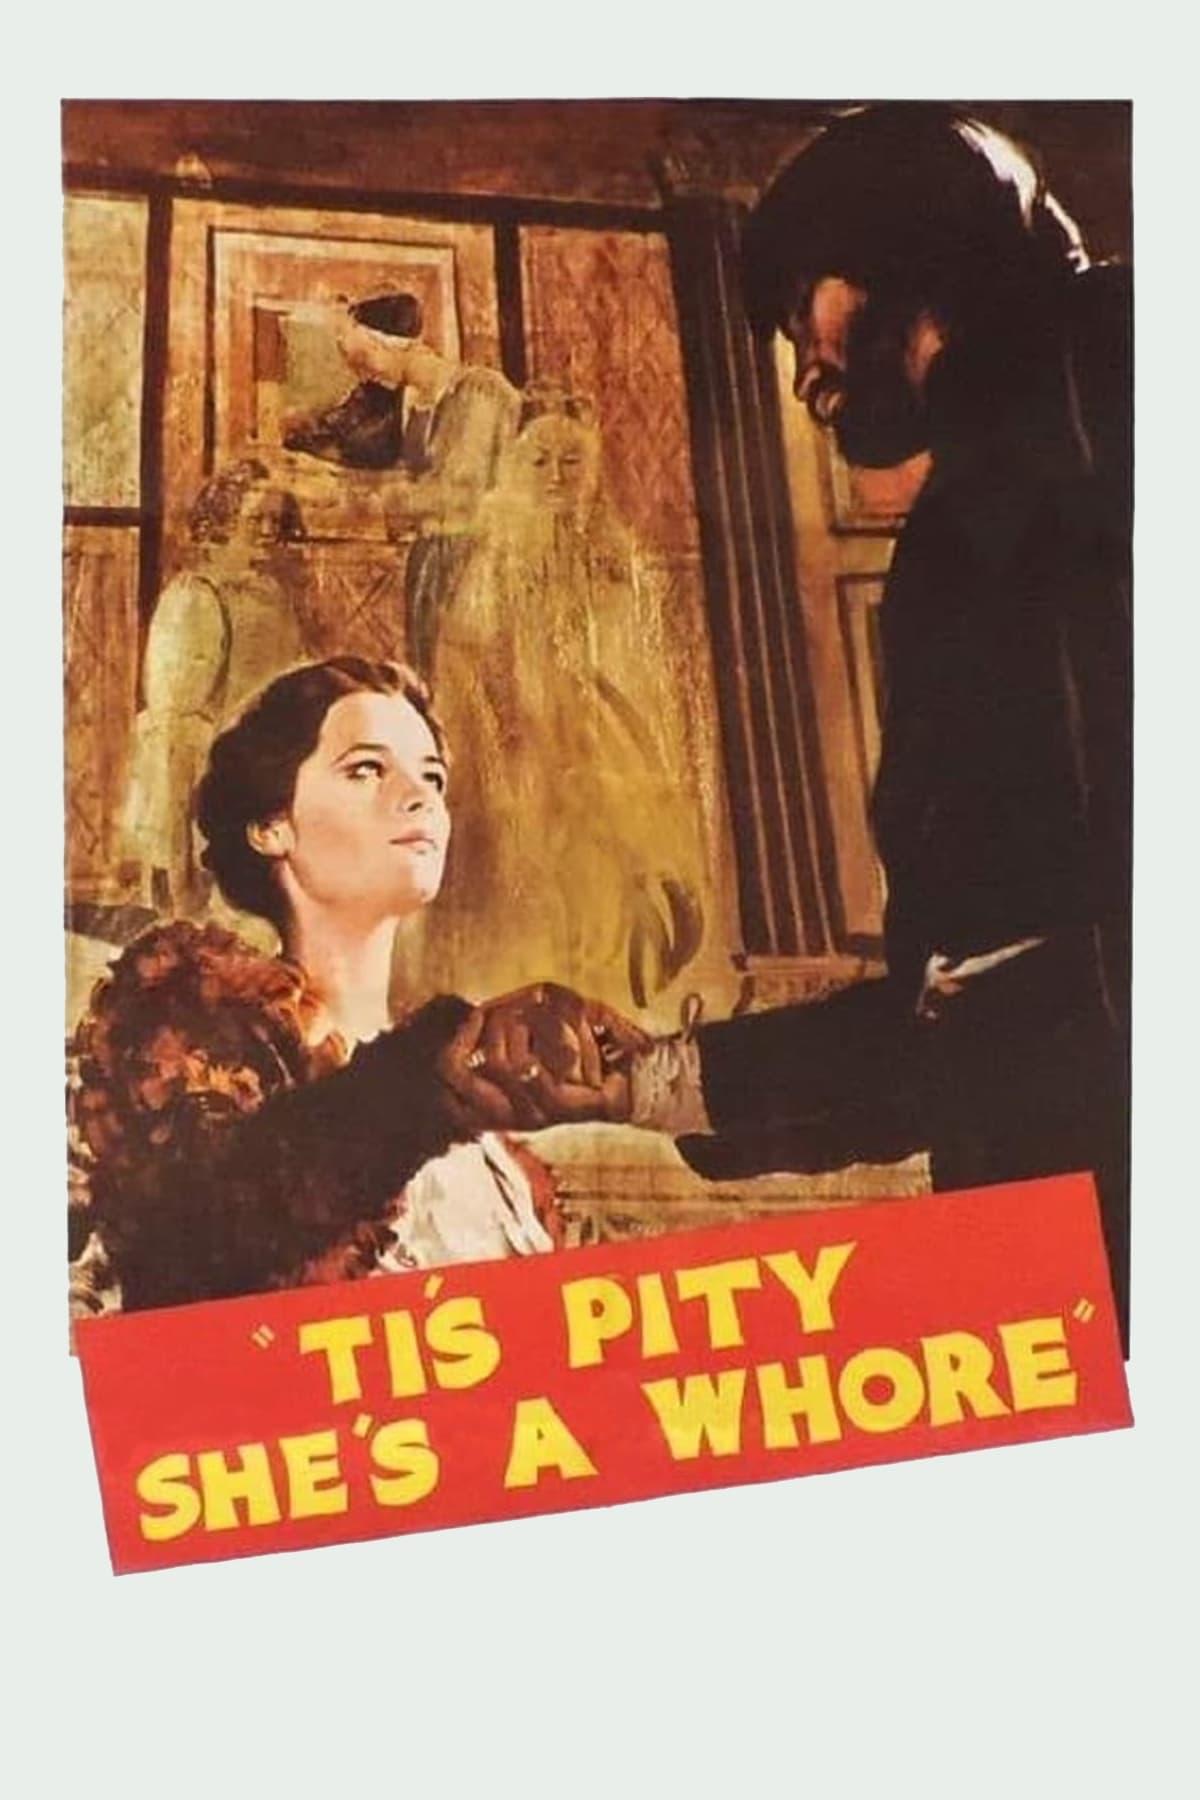 'Tis Pity She's a Whore poster